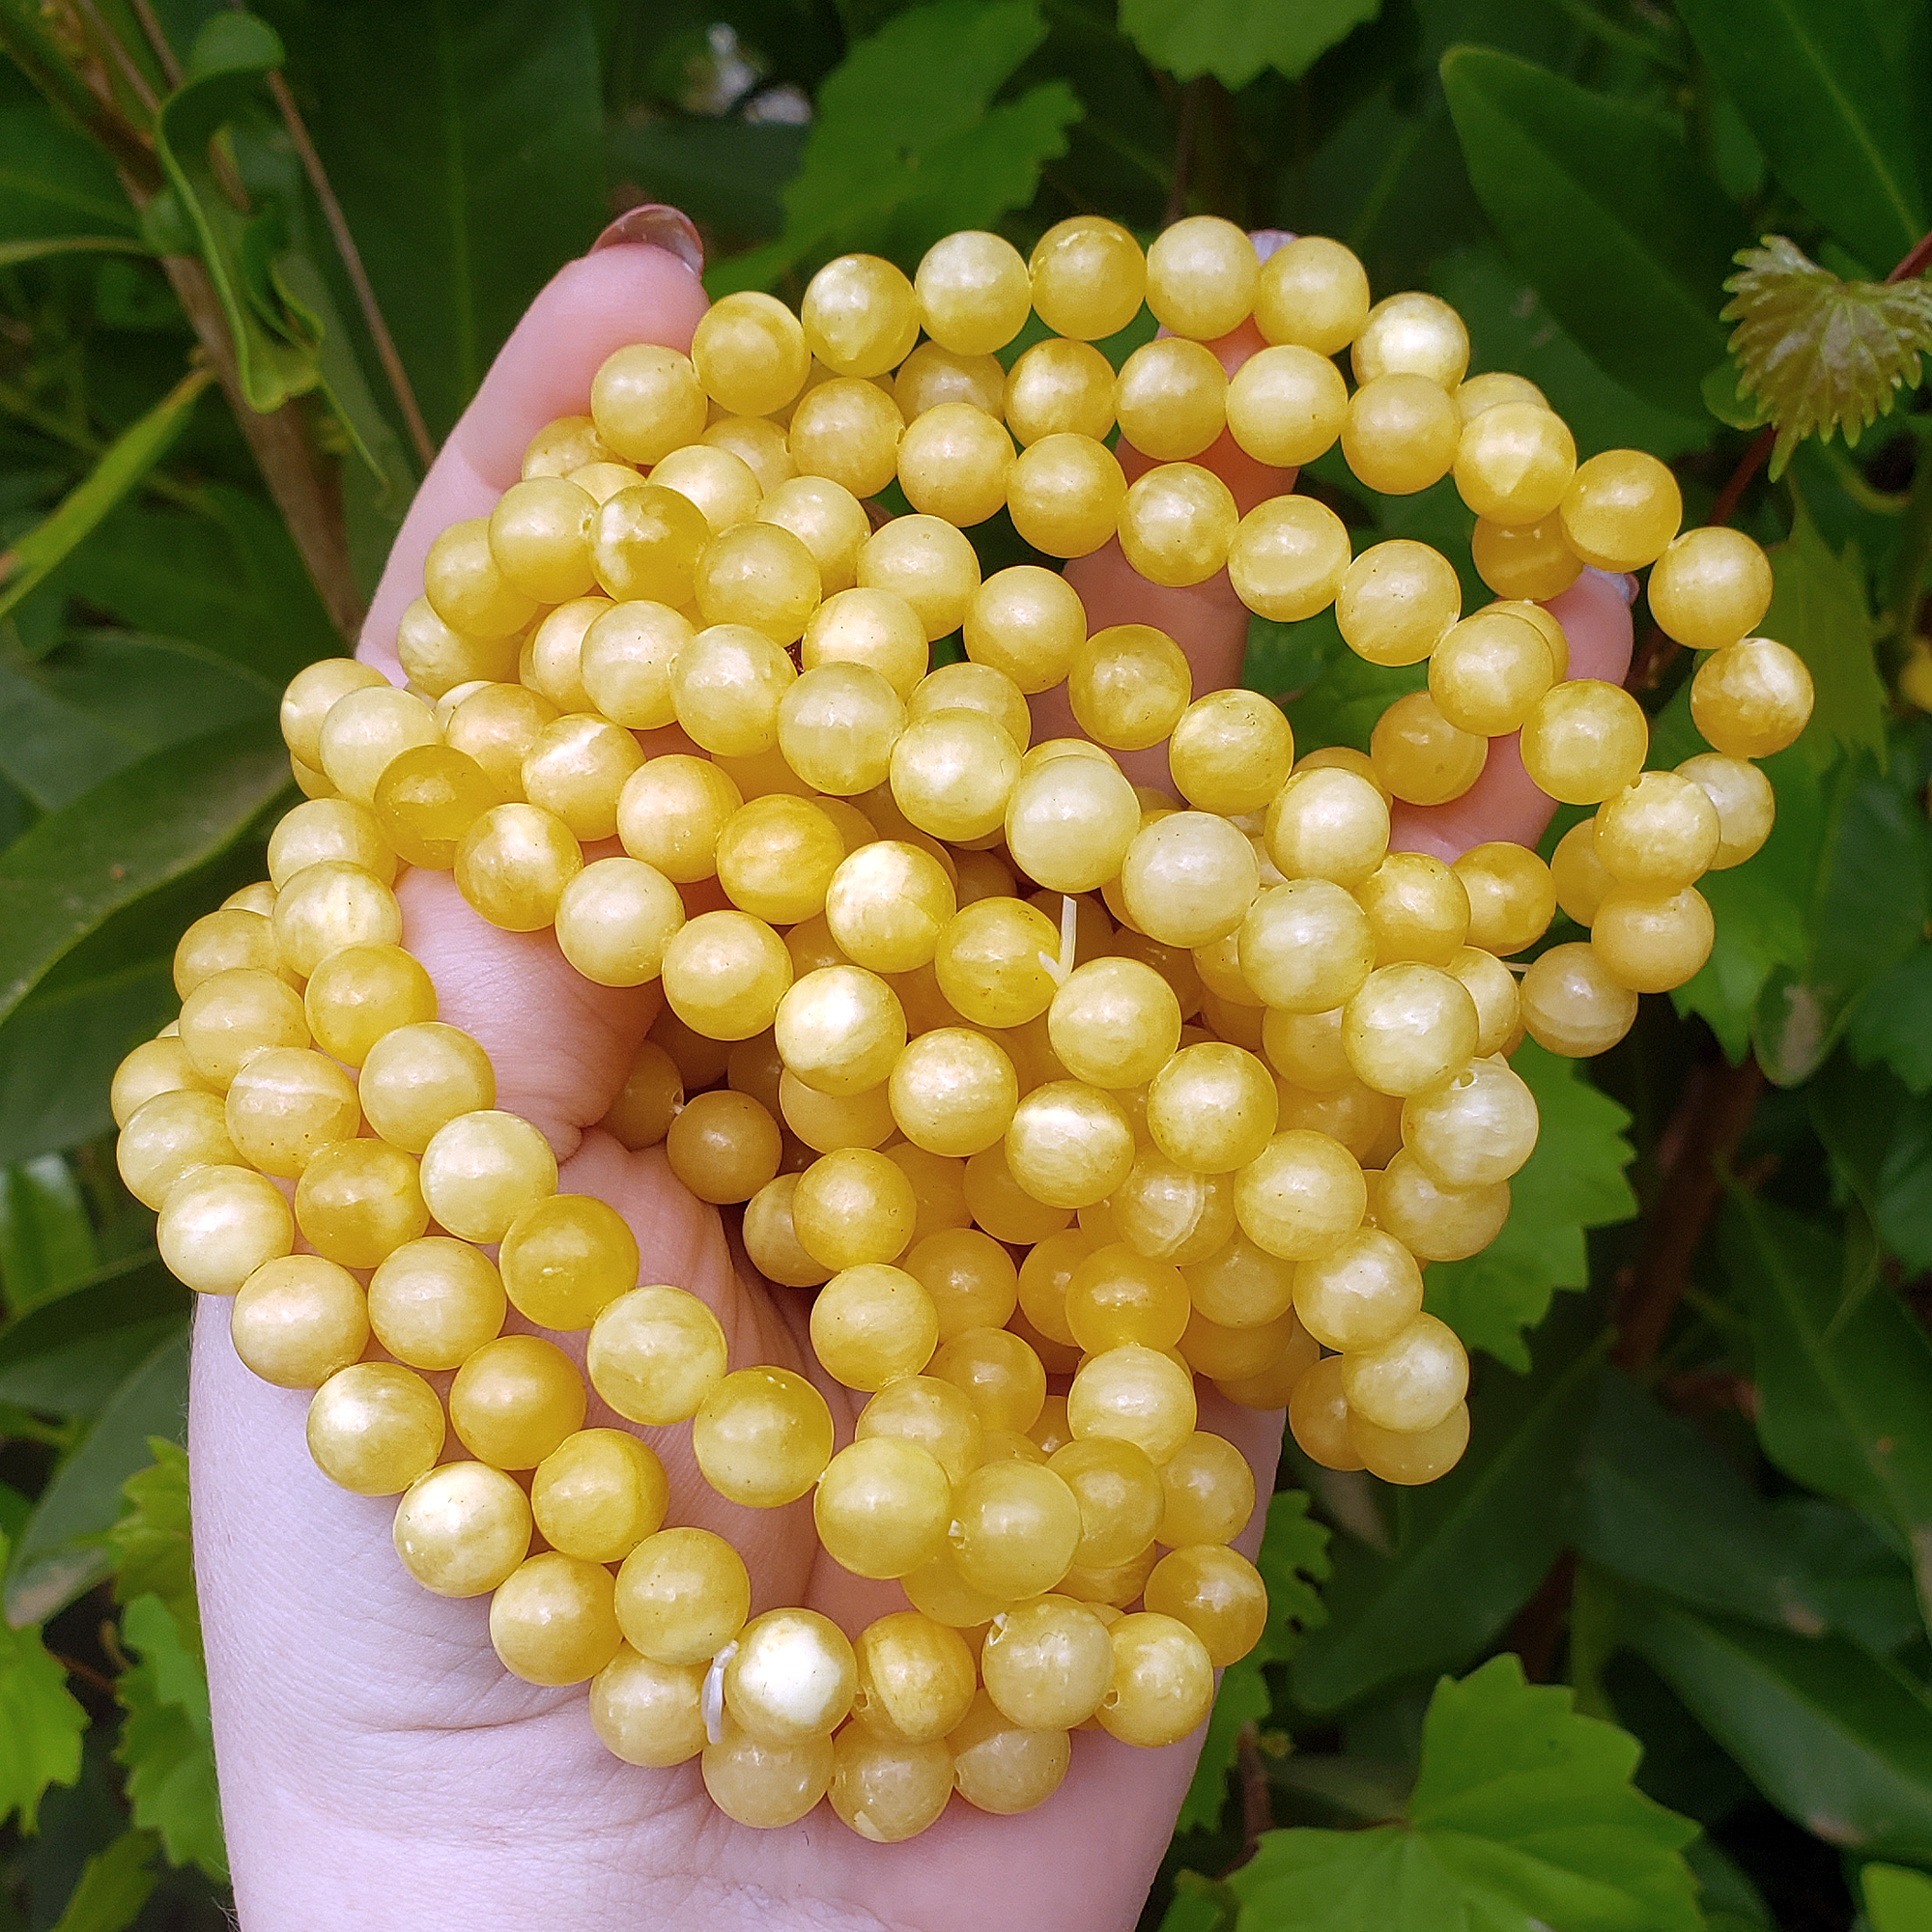 Yellow Calcite Natural Gemstone 7-8mm Bead Bracelet - Group of Bracelets in Hand